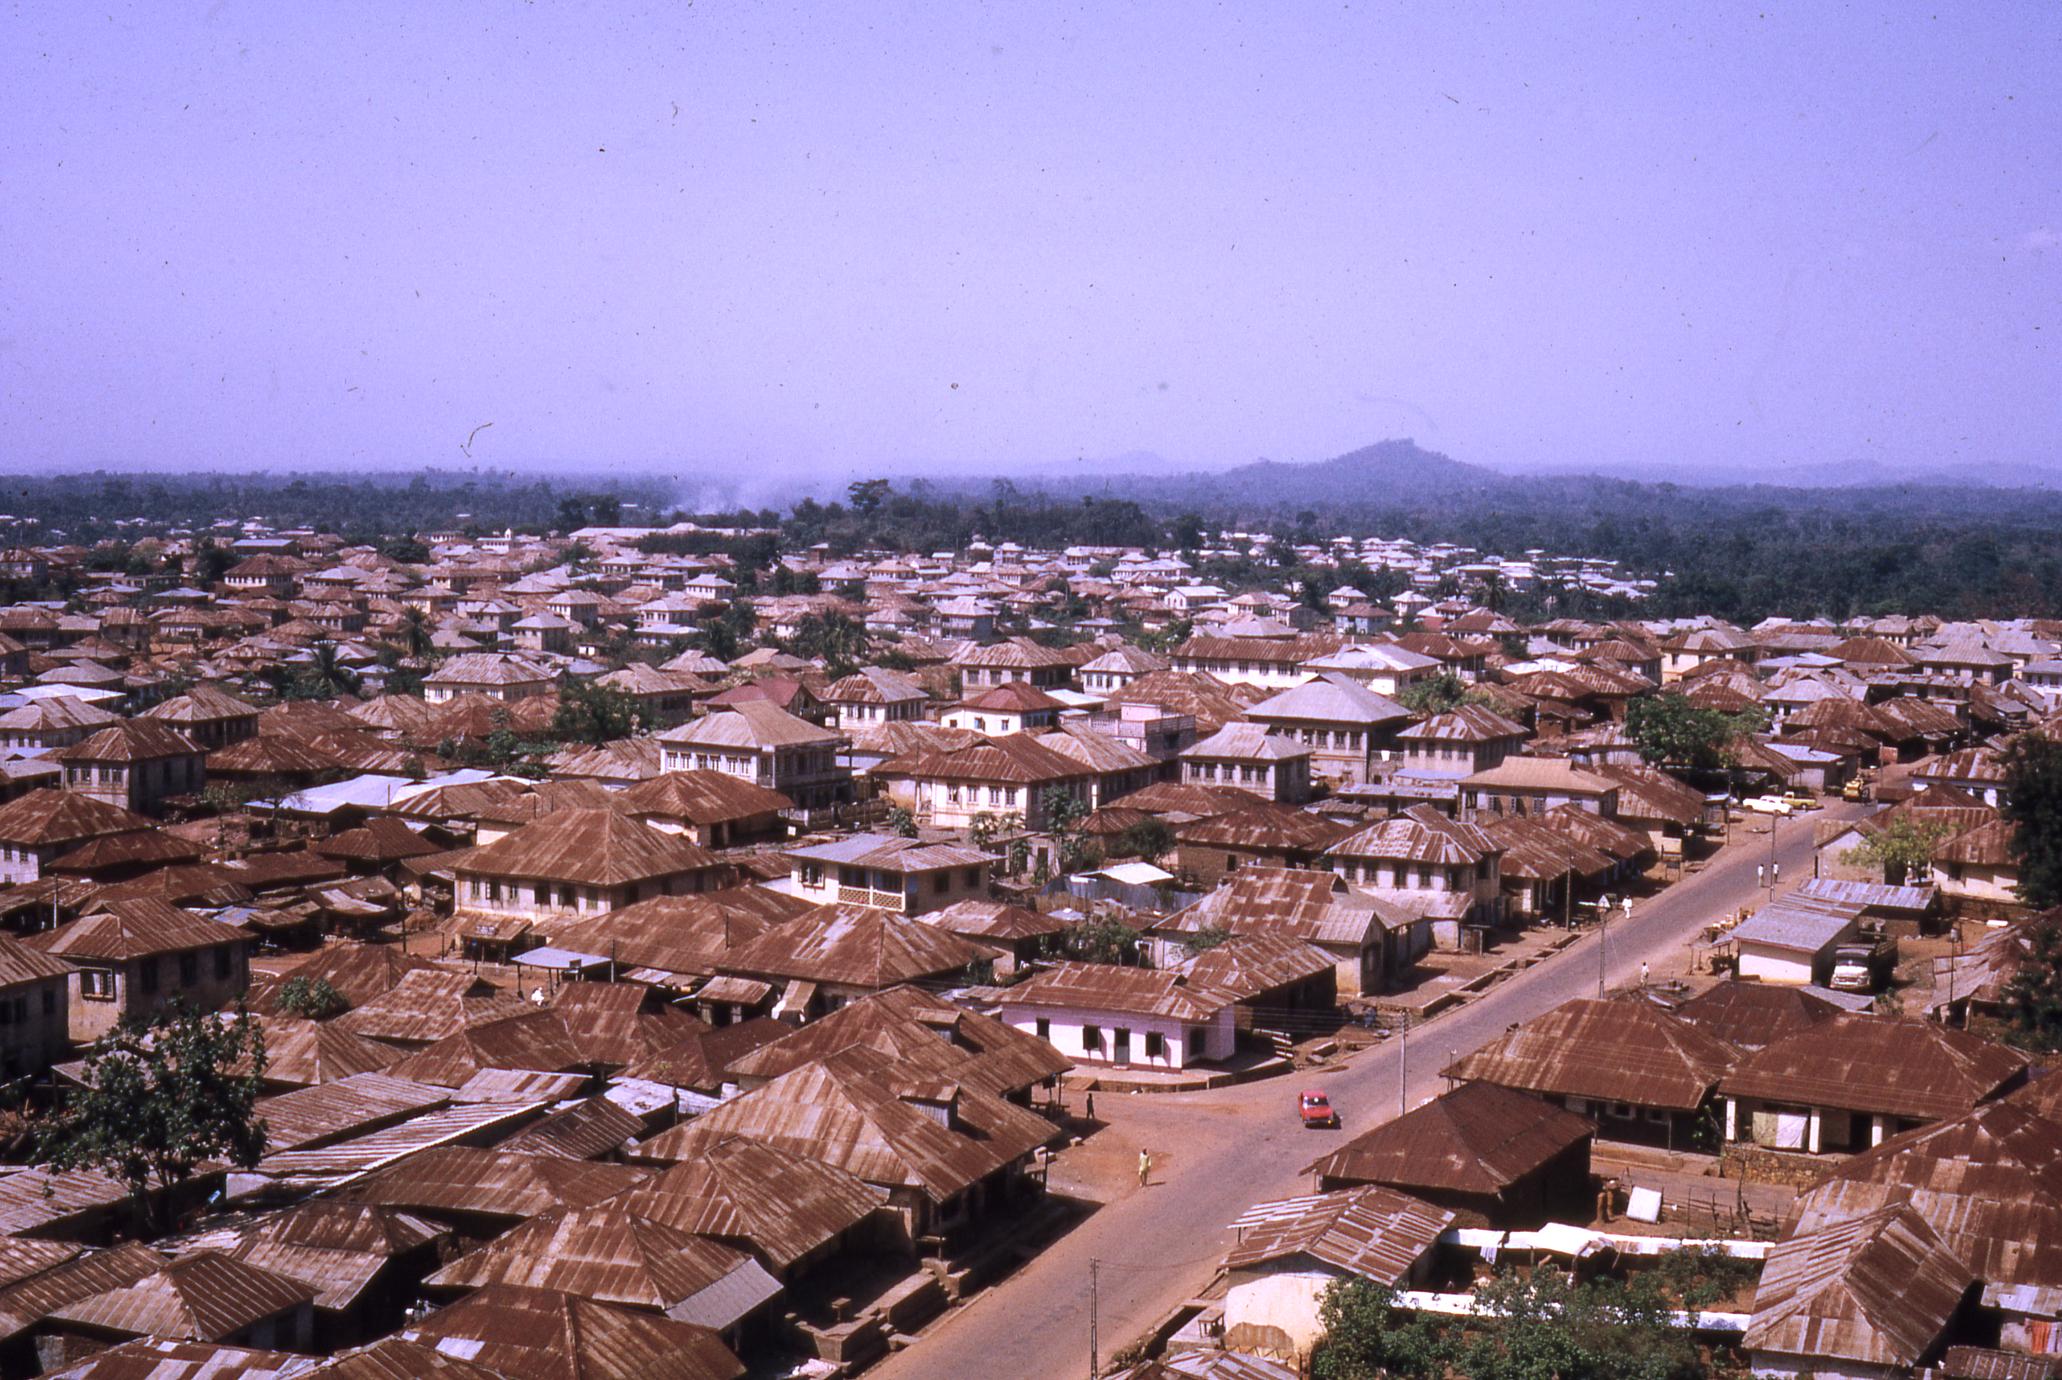 View of houses and street facing Ijoka